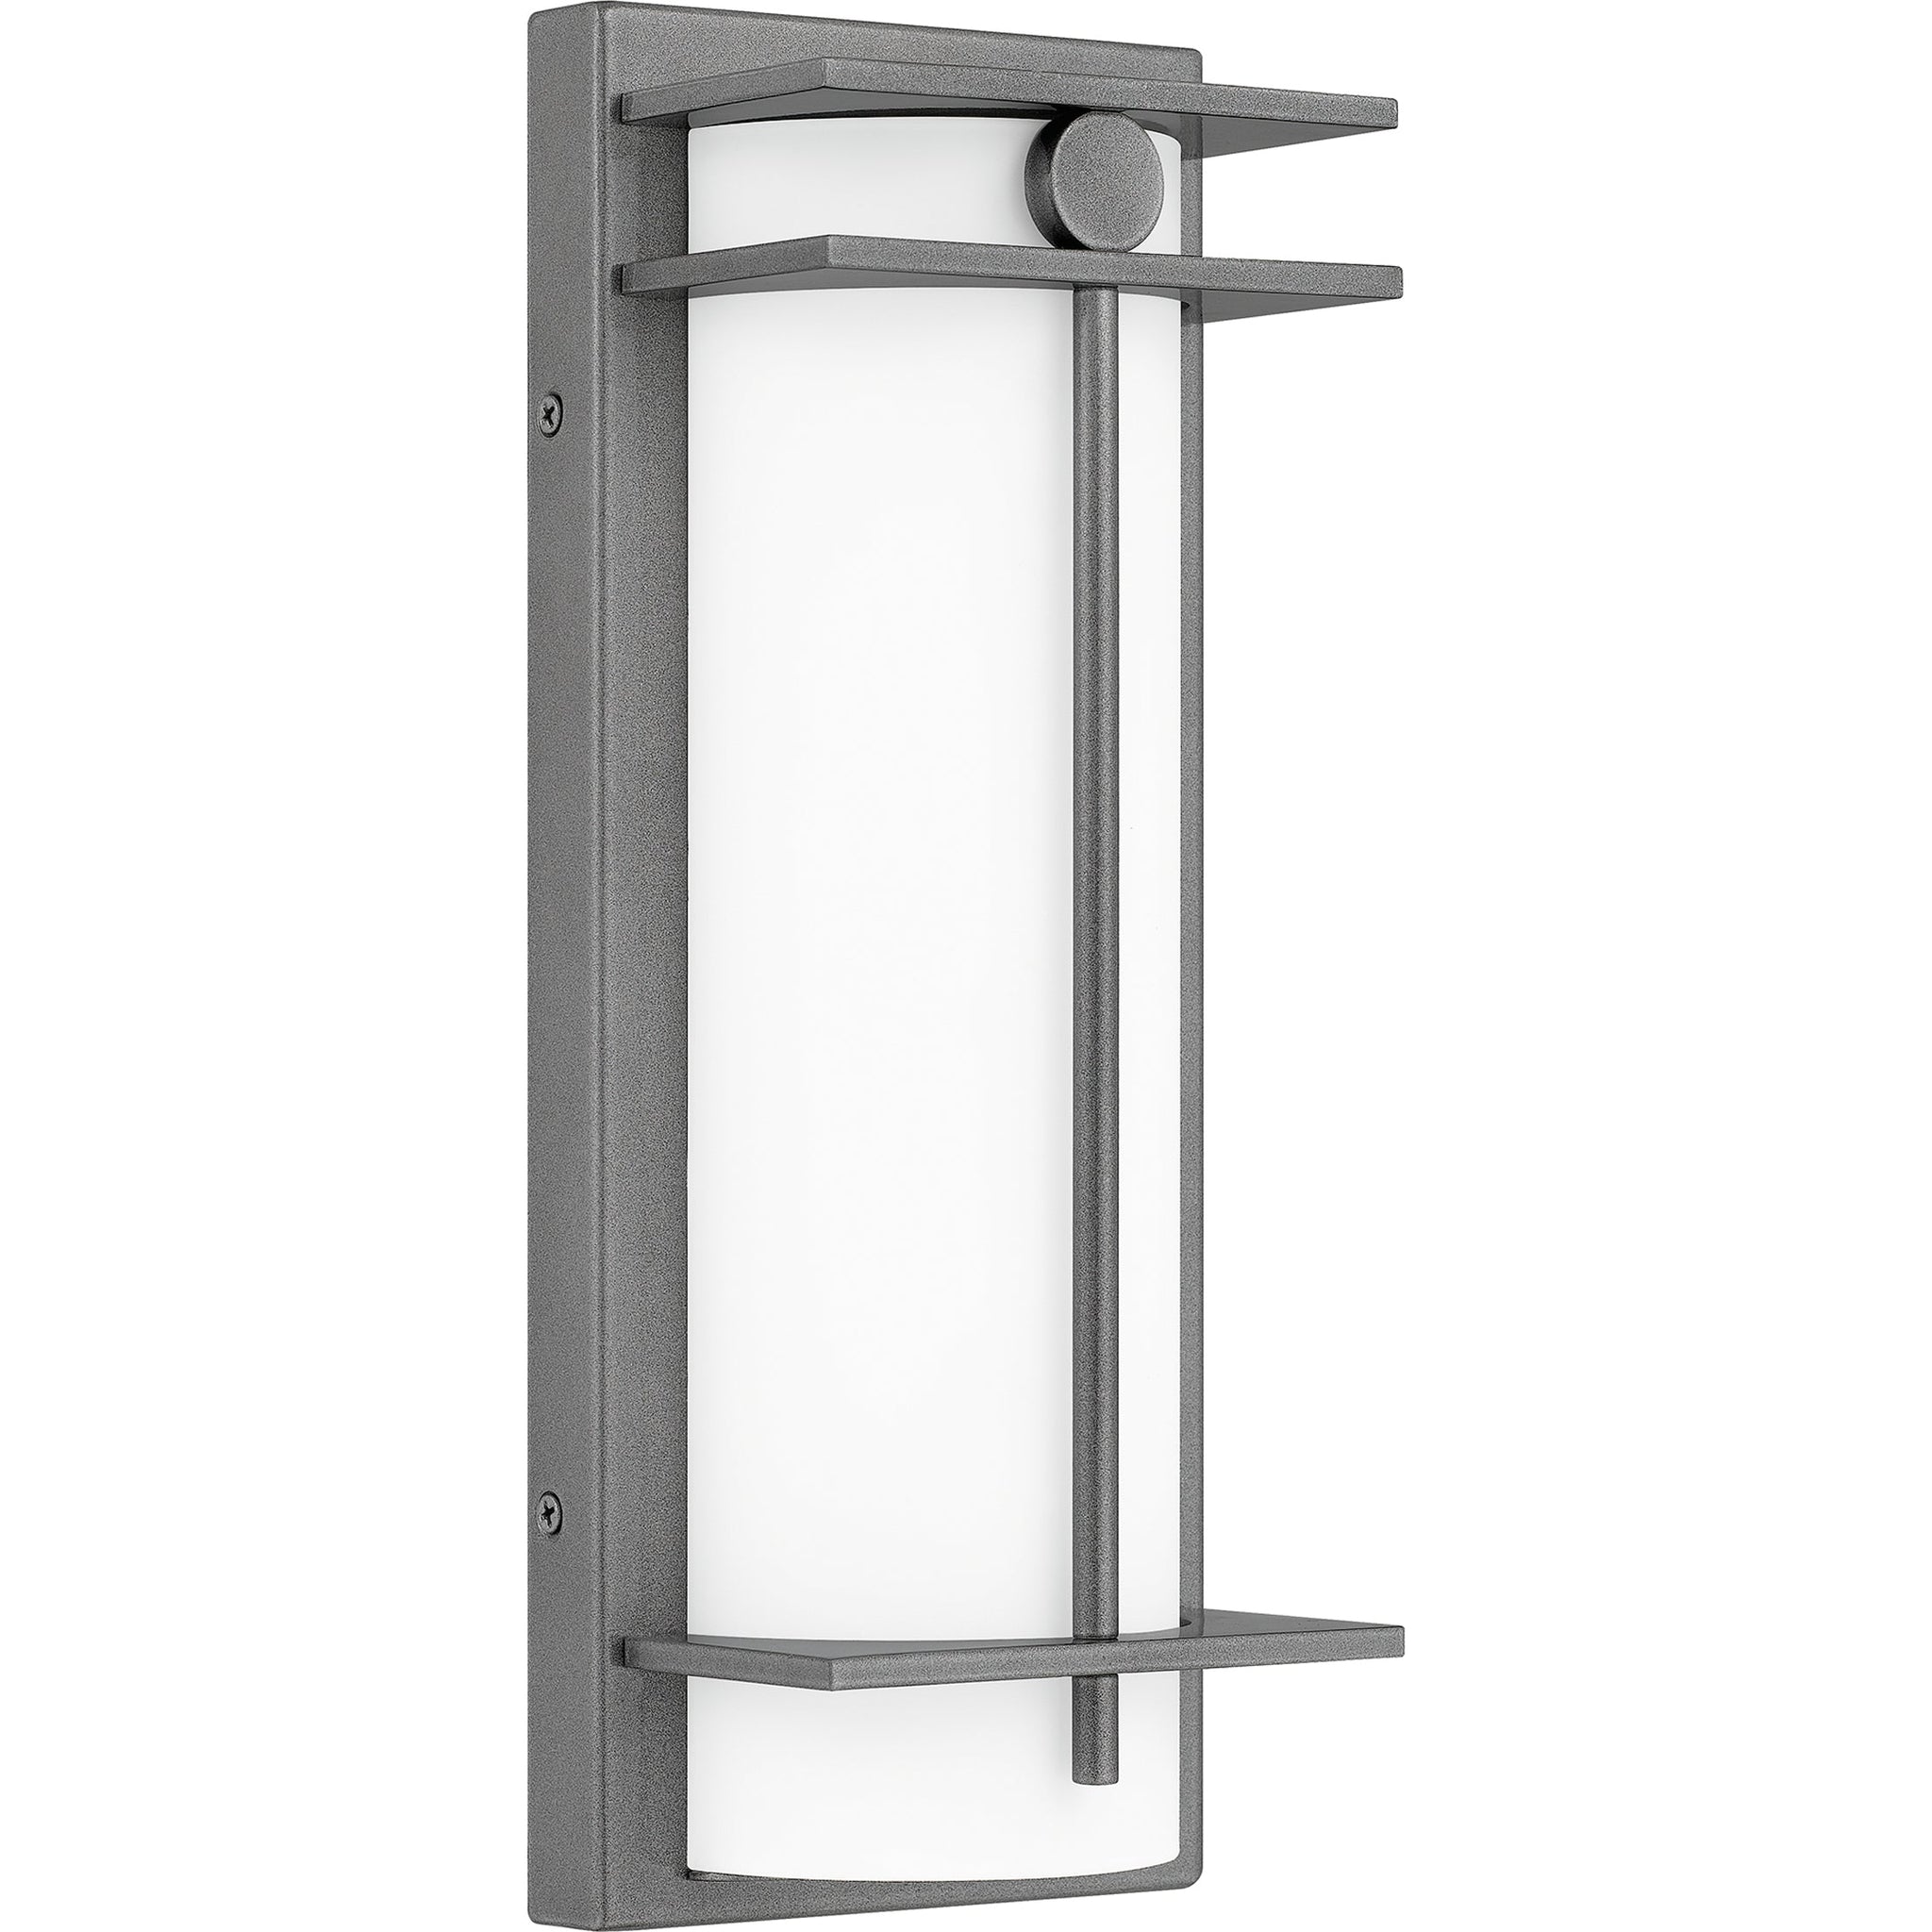 Syndall Outdoor Wall Light